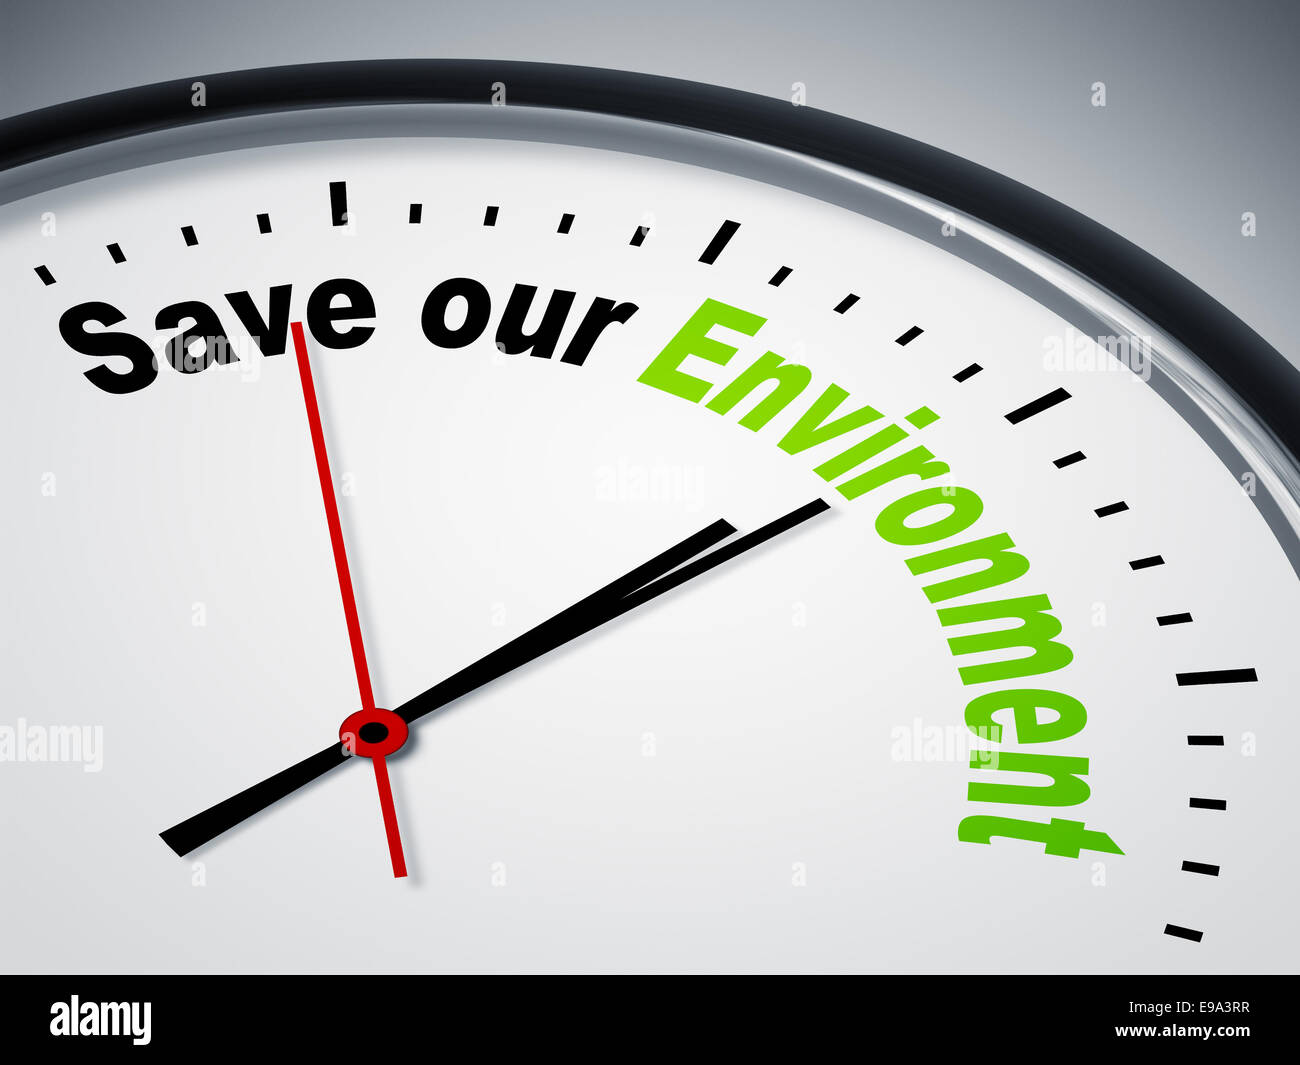 Save our Environment Stock Photo